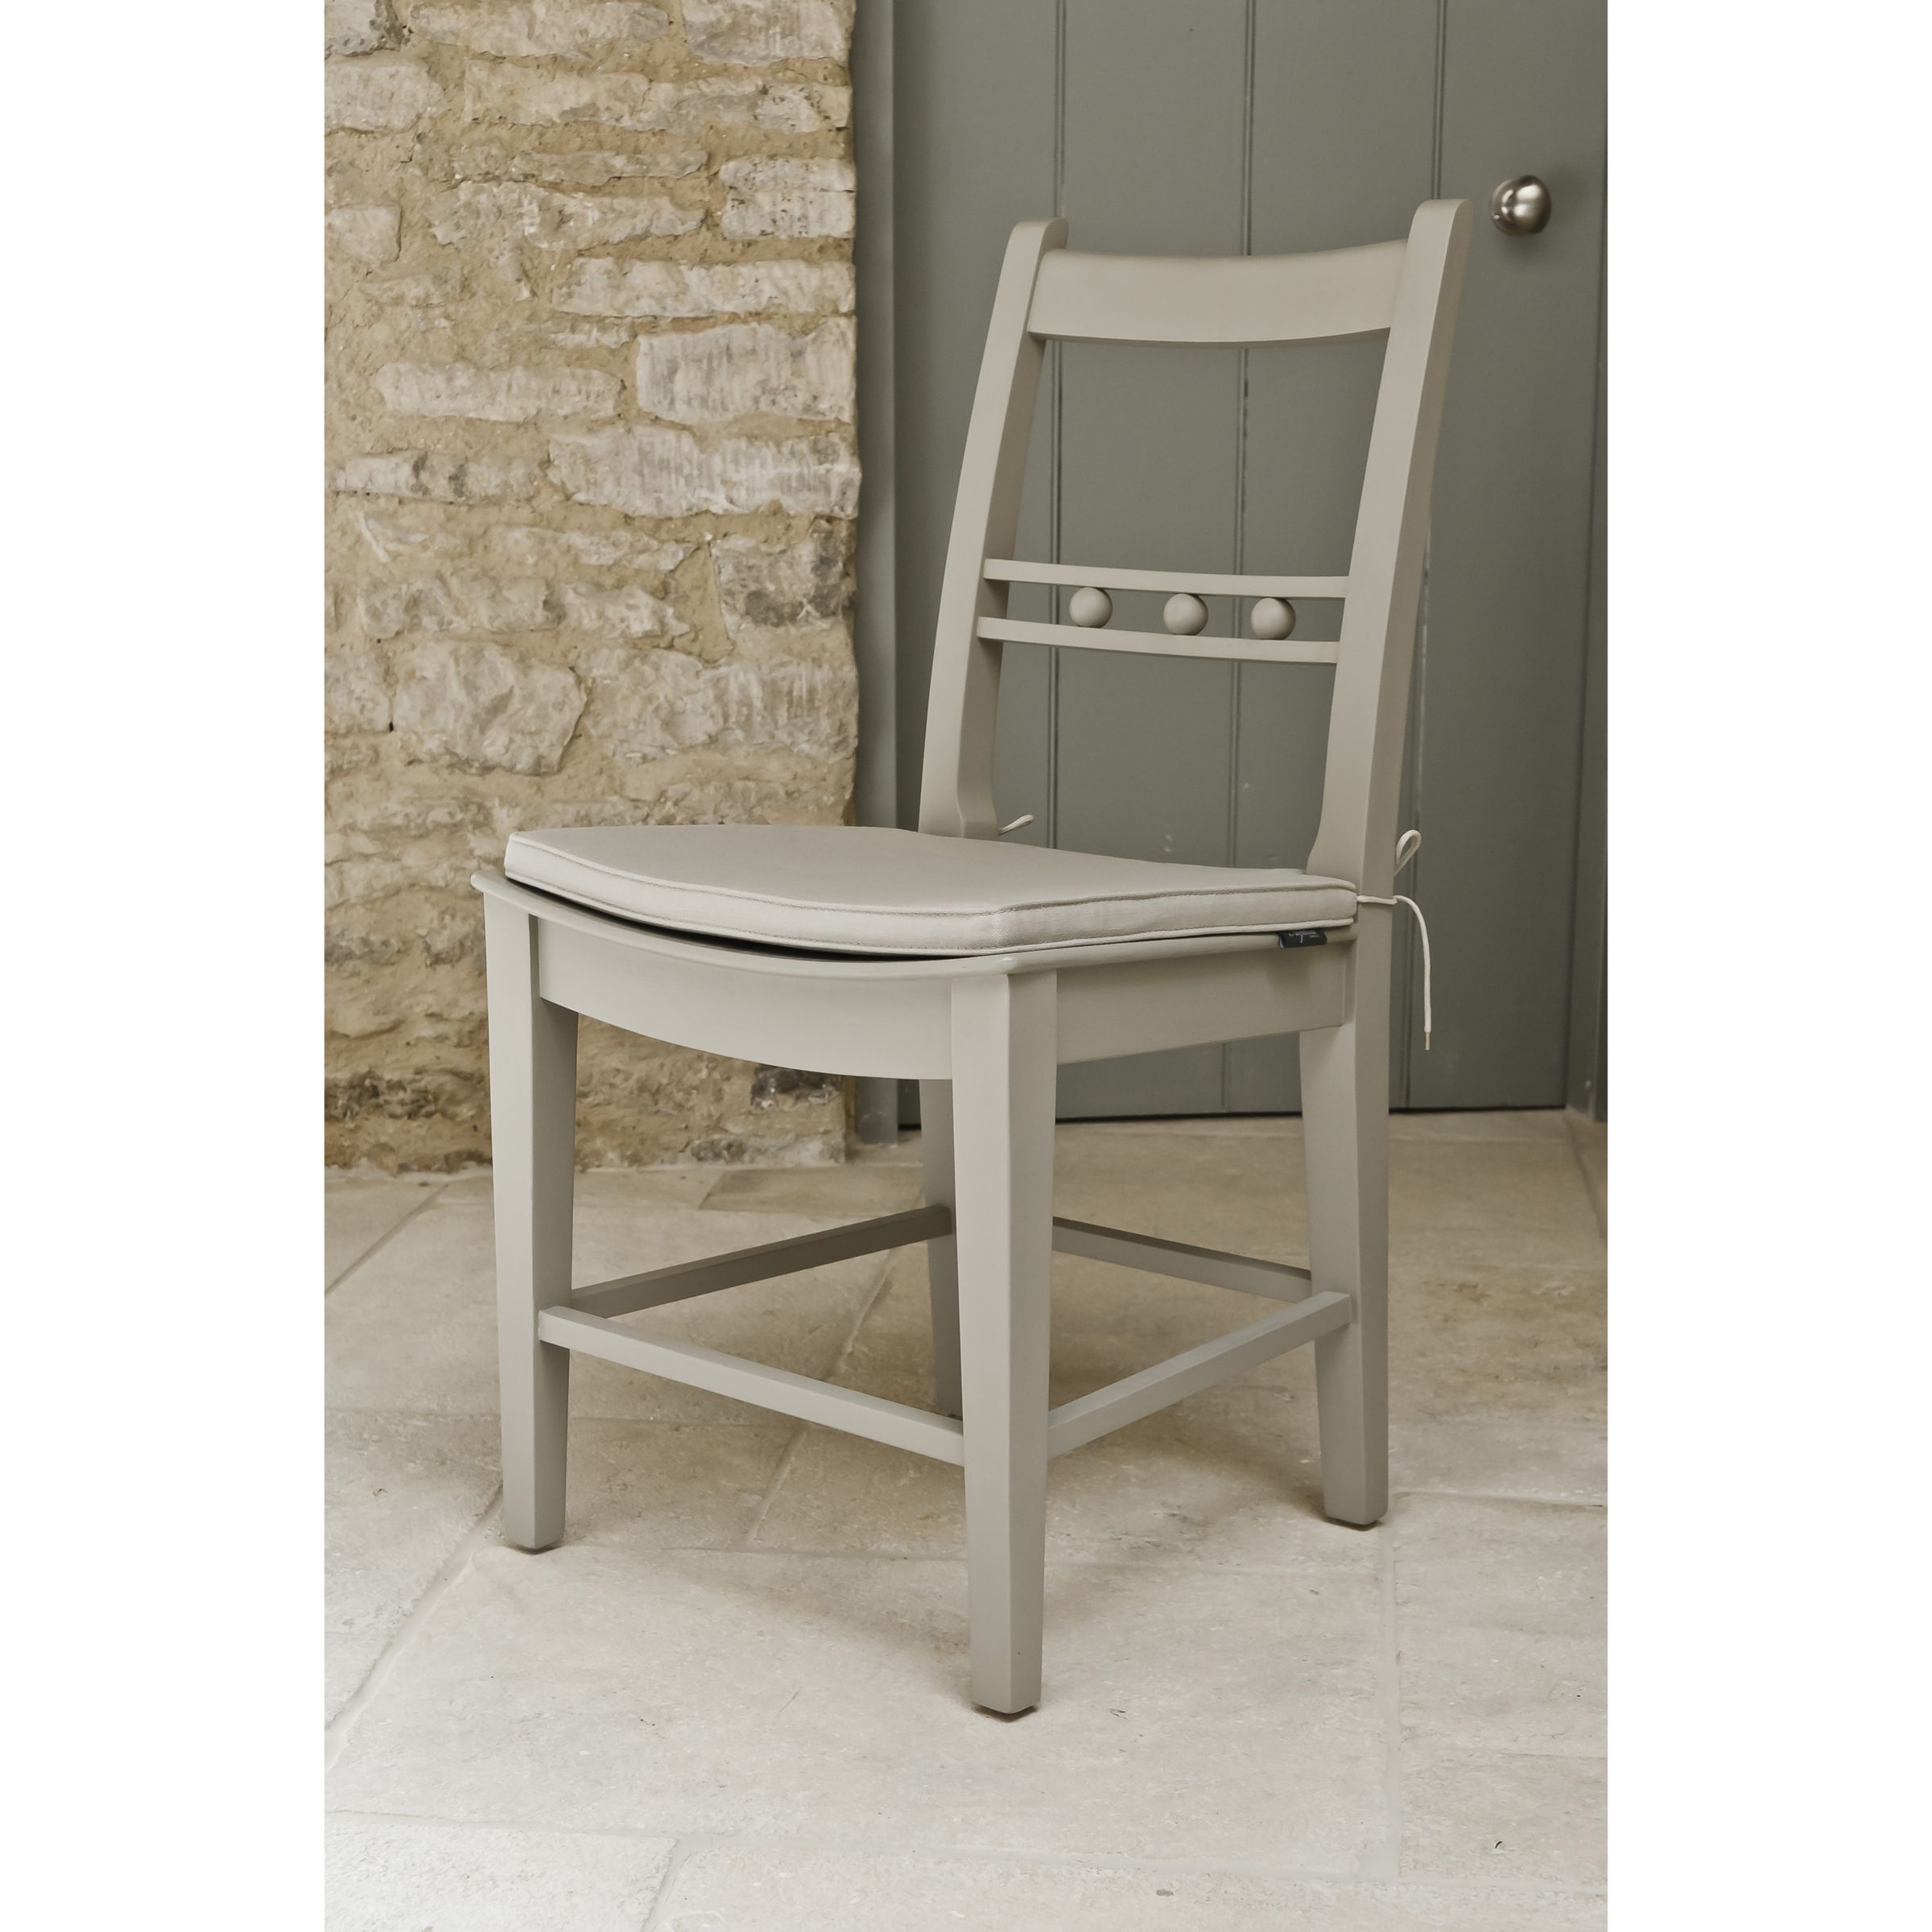 Neptune Suffolk Dining Chair, Honed Slate at John Lewis & Partners